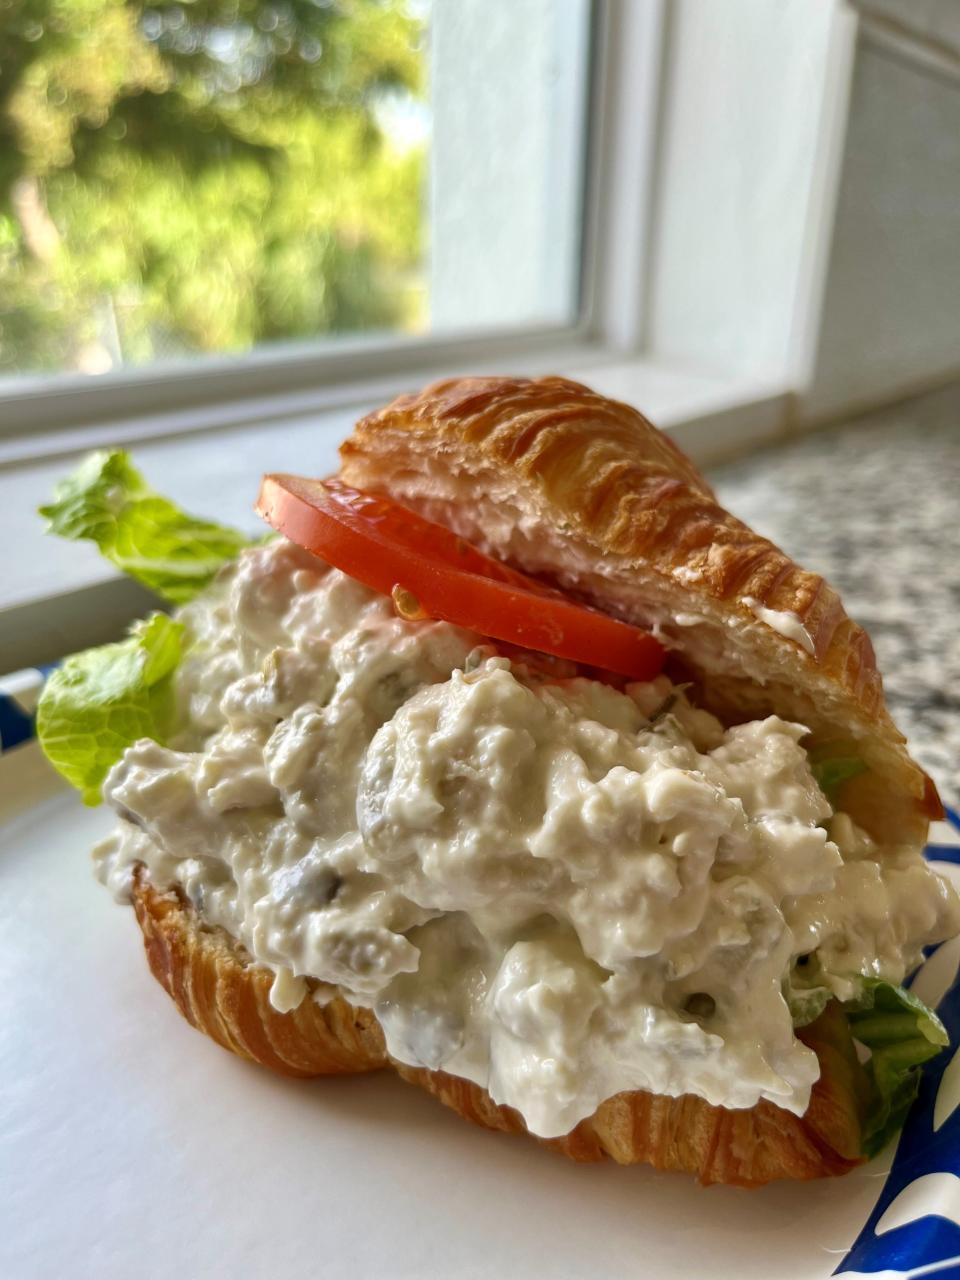 Croissants overflowing with tuna, chicken, or bacon, egg and cheese are popular lunch favorites at Pine Island Getaway Cafe.